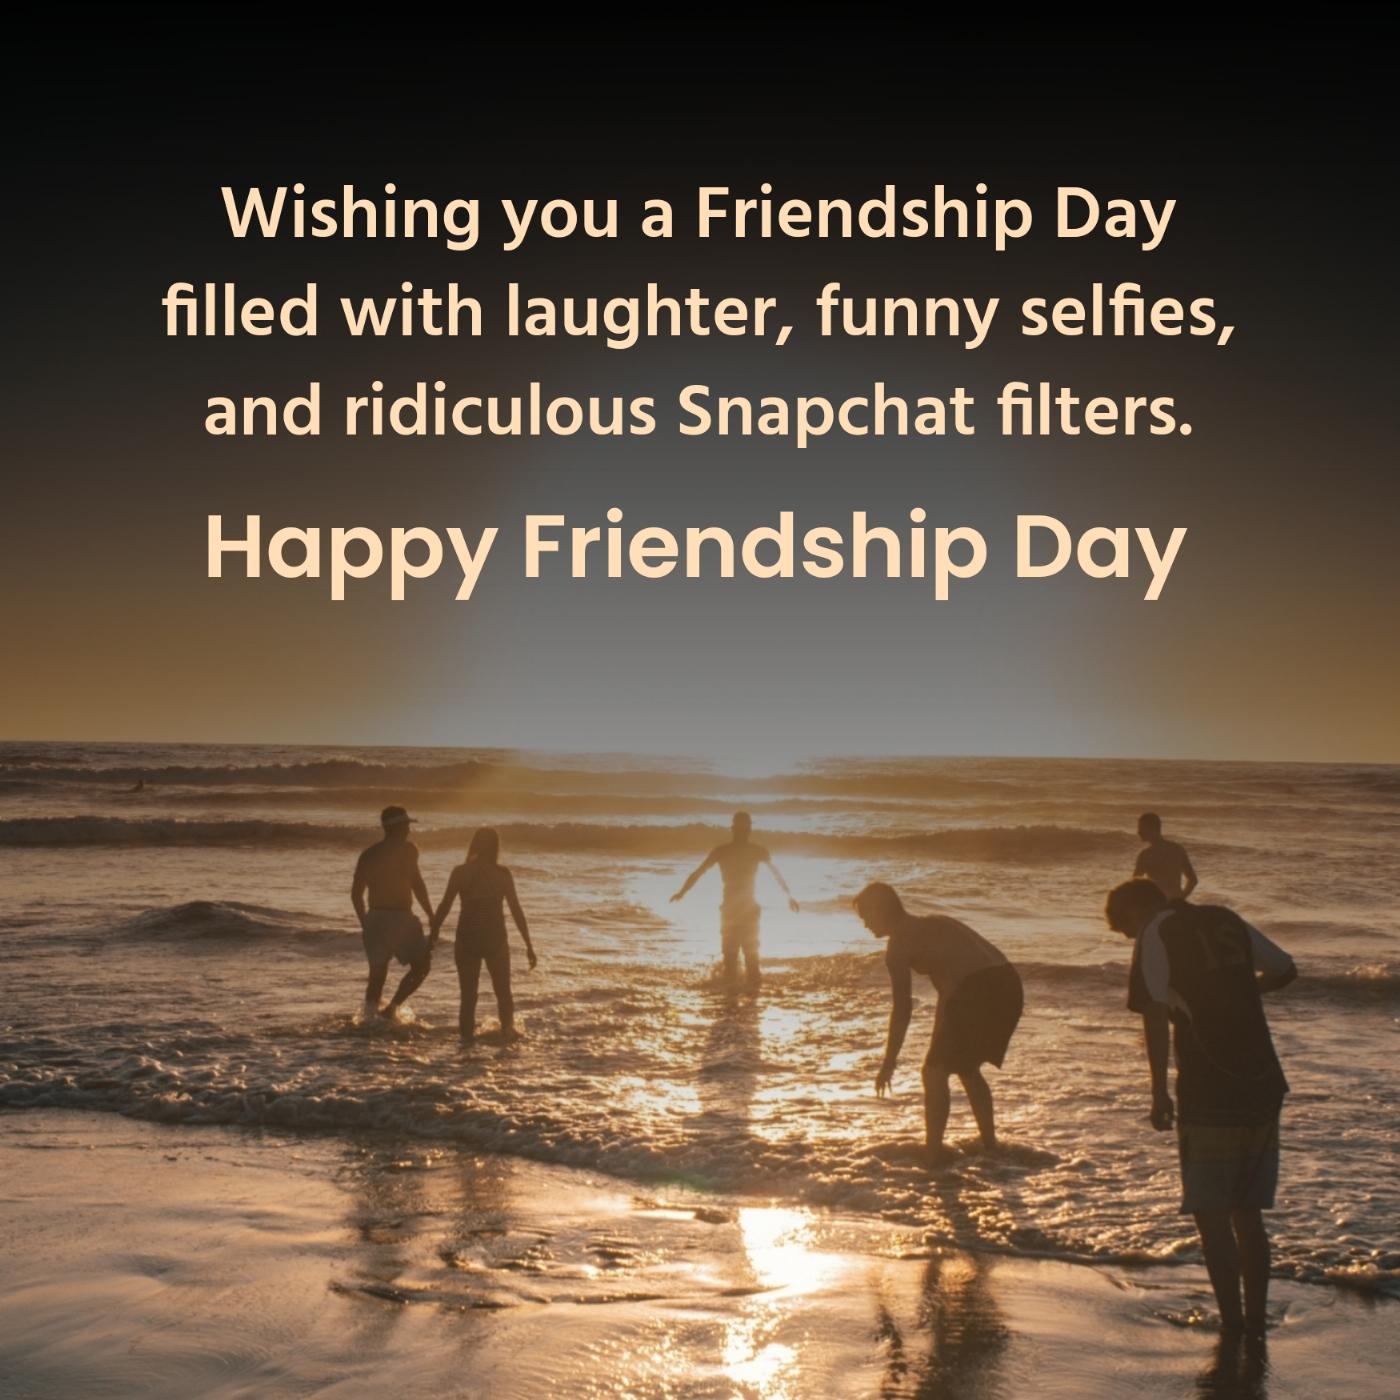 Wishing you a Friendship Day filled with laughter funny selfies